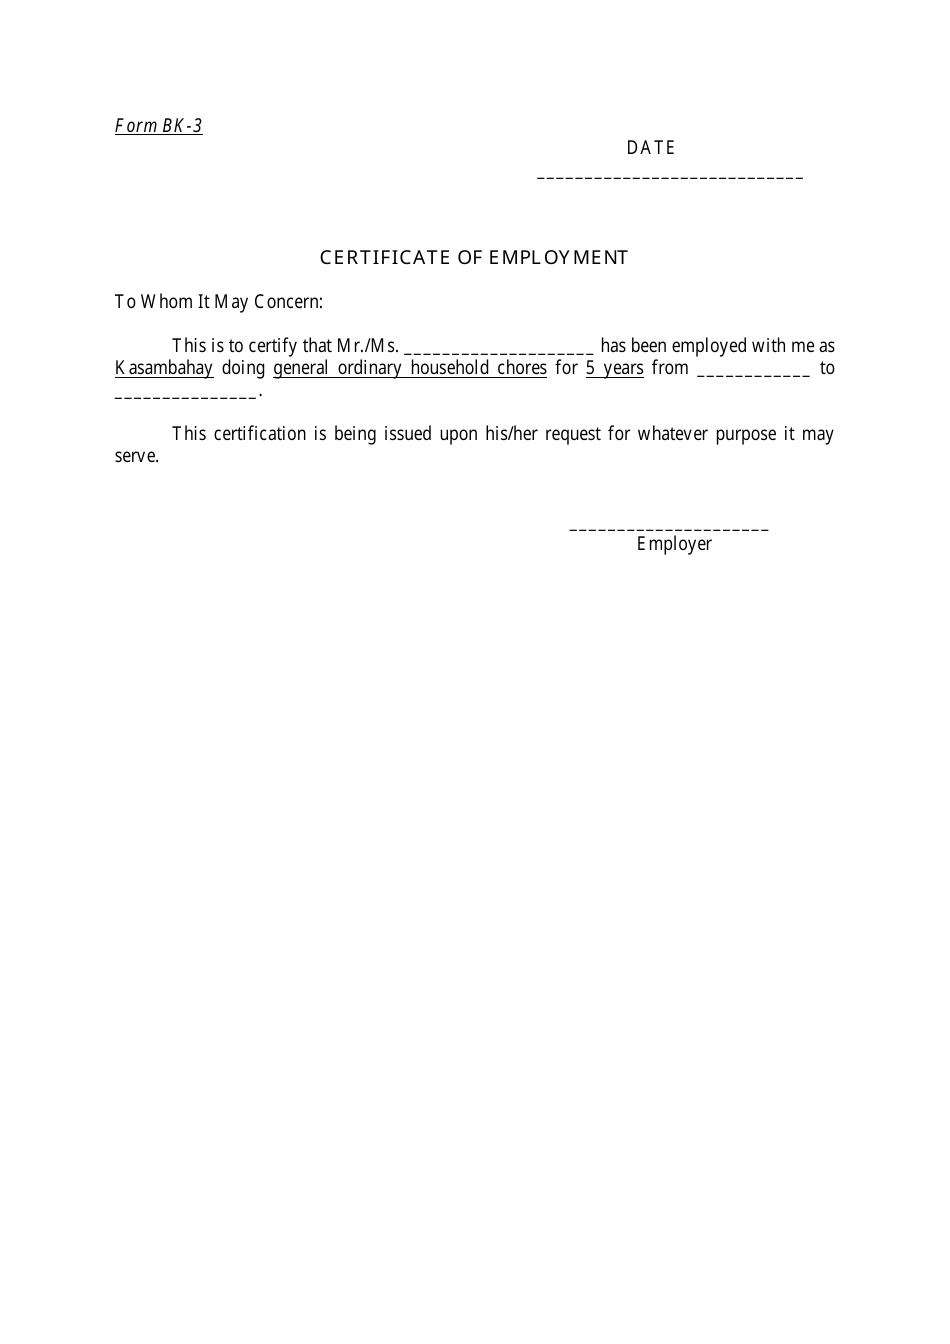 Form BK-3 Certificate of Employment - Philippines, Page 1